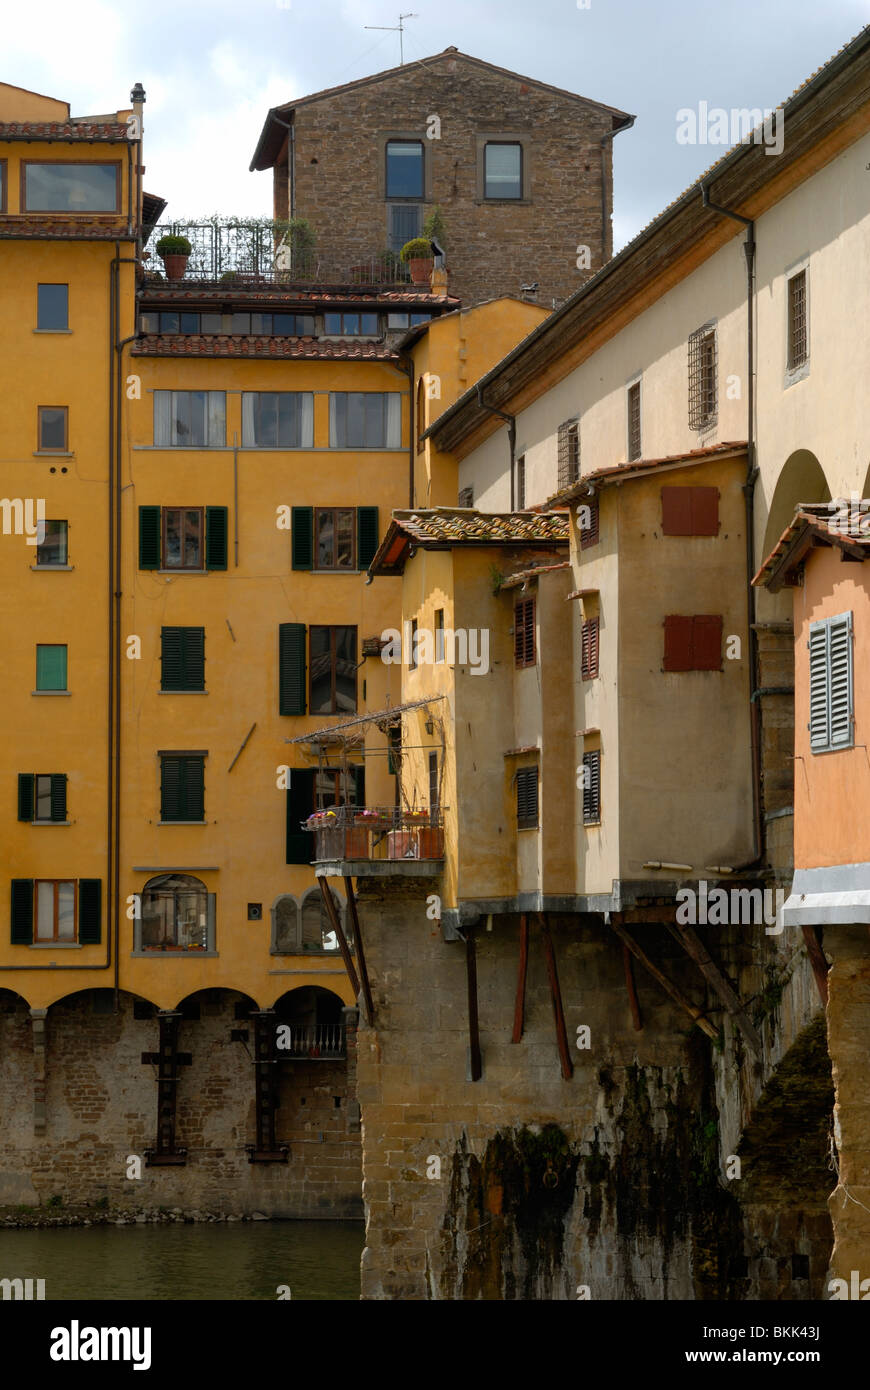 The Ponte Vecchio, the Old Bridge, is built by Taddeo Gaddi, a student of Giotto, in 1354. Some of the oldest goldsmith and .... Stock Photo